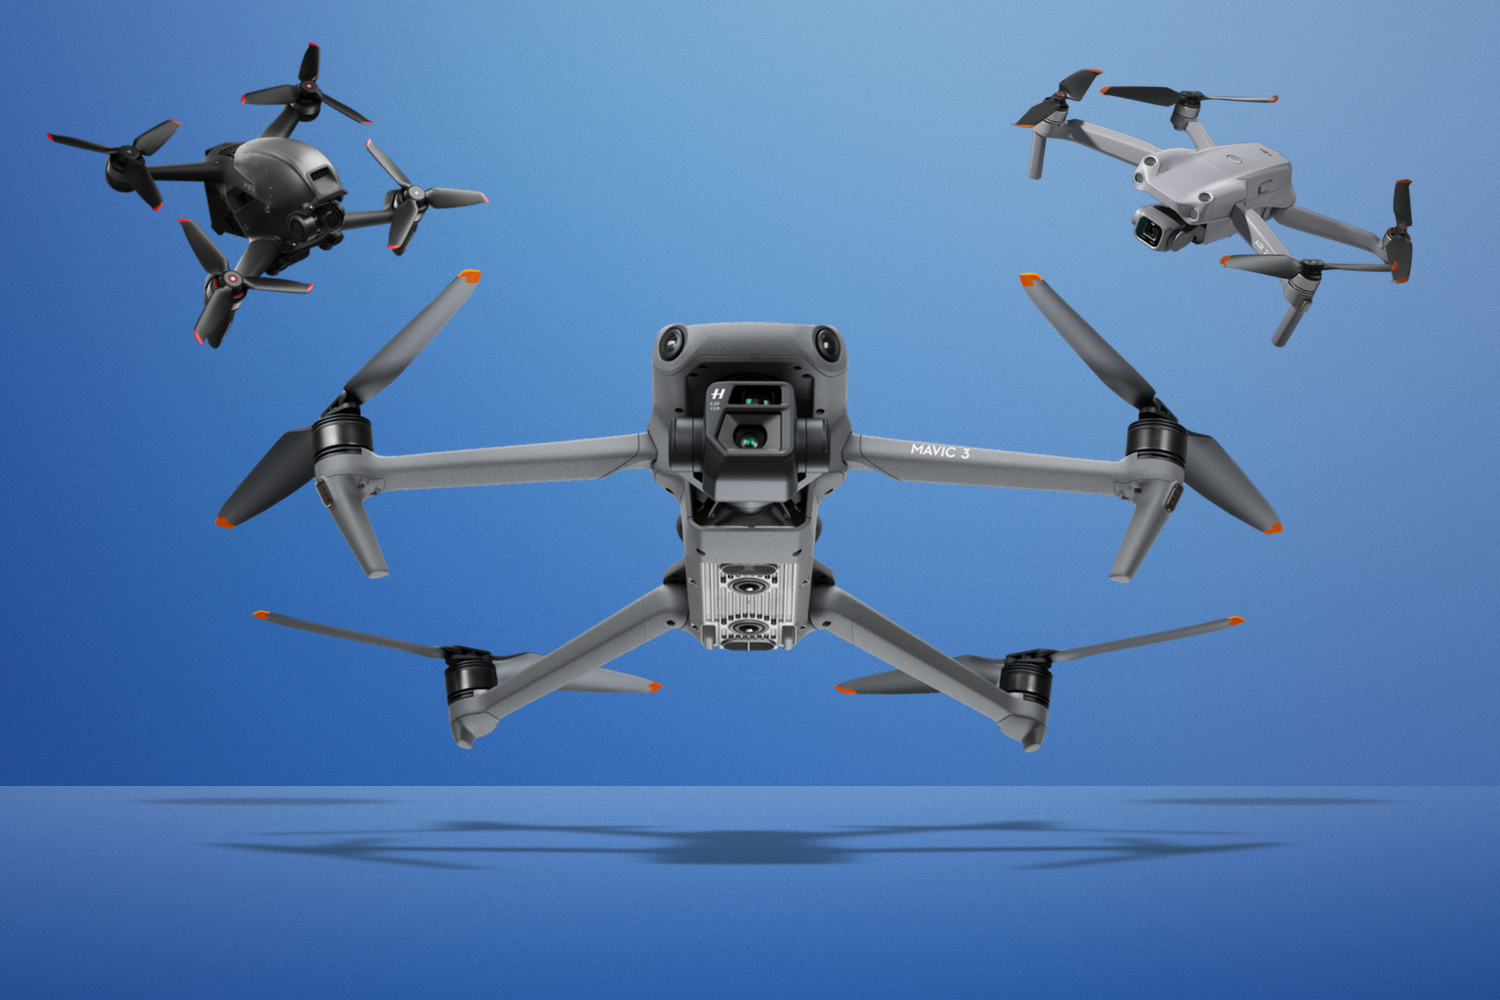 DJI Air 2S review: The best drone for most people